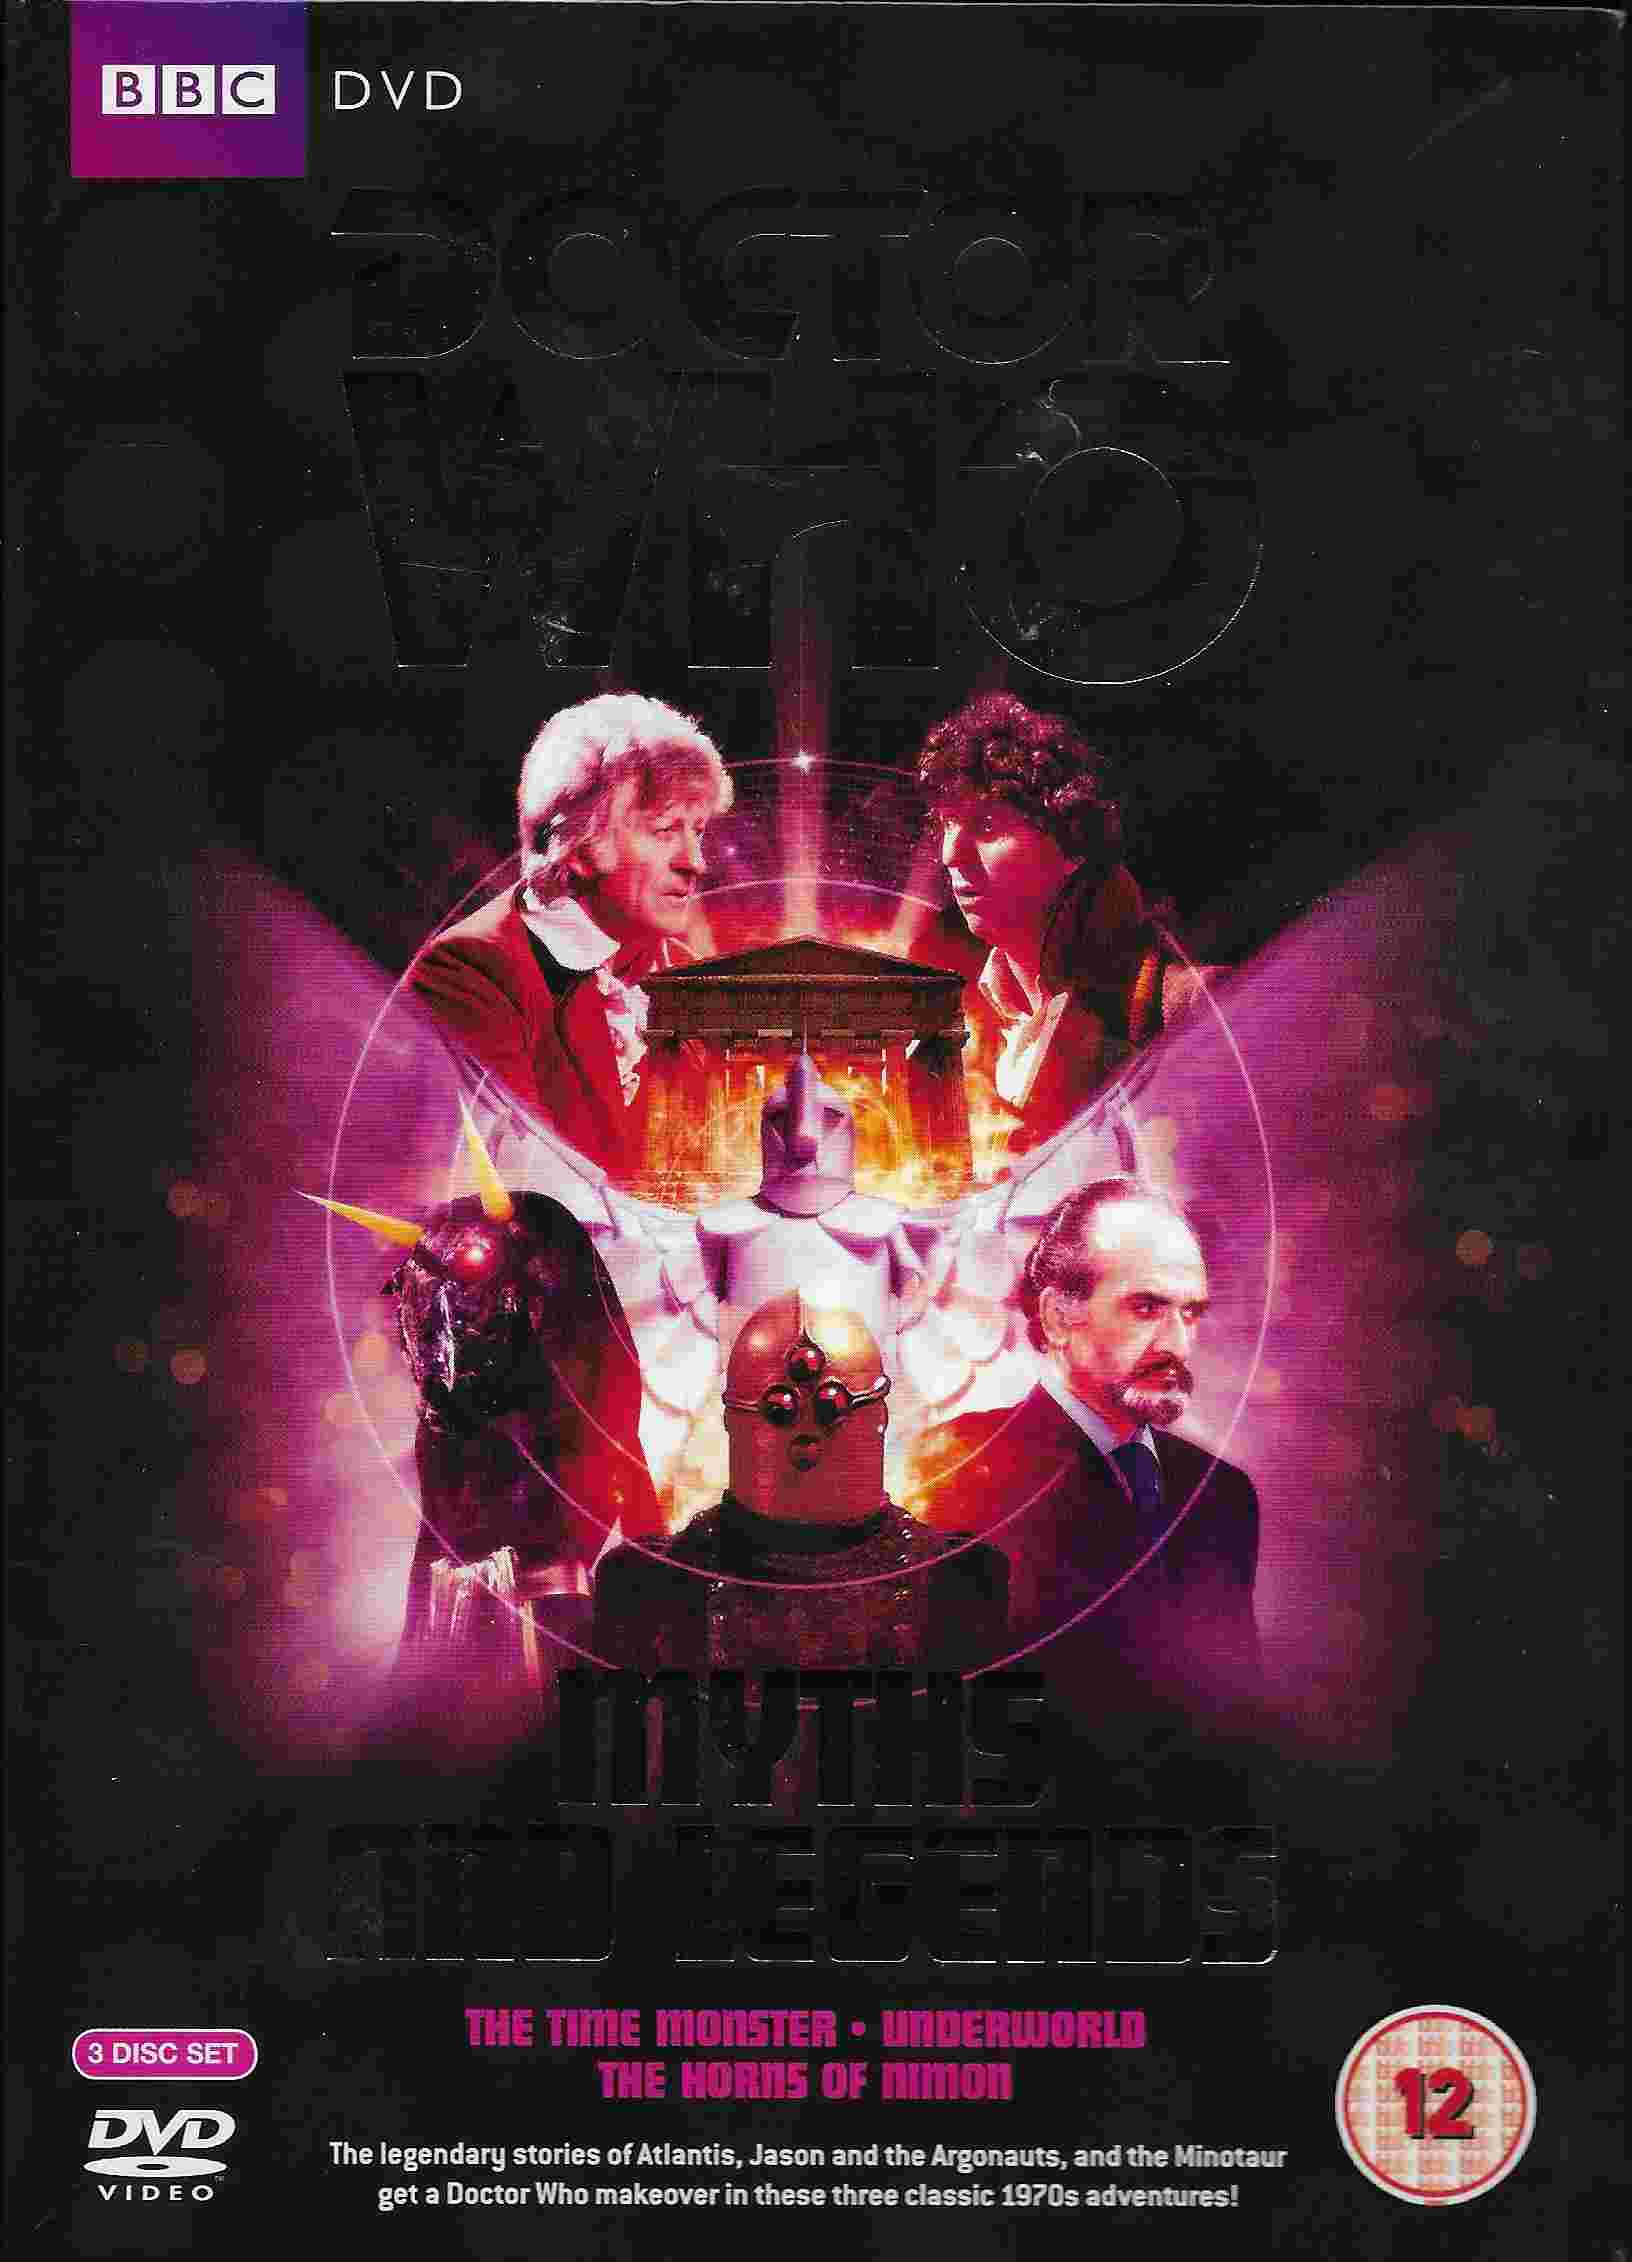 Picture of BBCDVD 2851 Doctor Who - Myths and Legends by artist Robert Sloman / Bob Baker / Dave Martin / Anthony Read from the BBC records and Tapes library